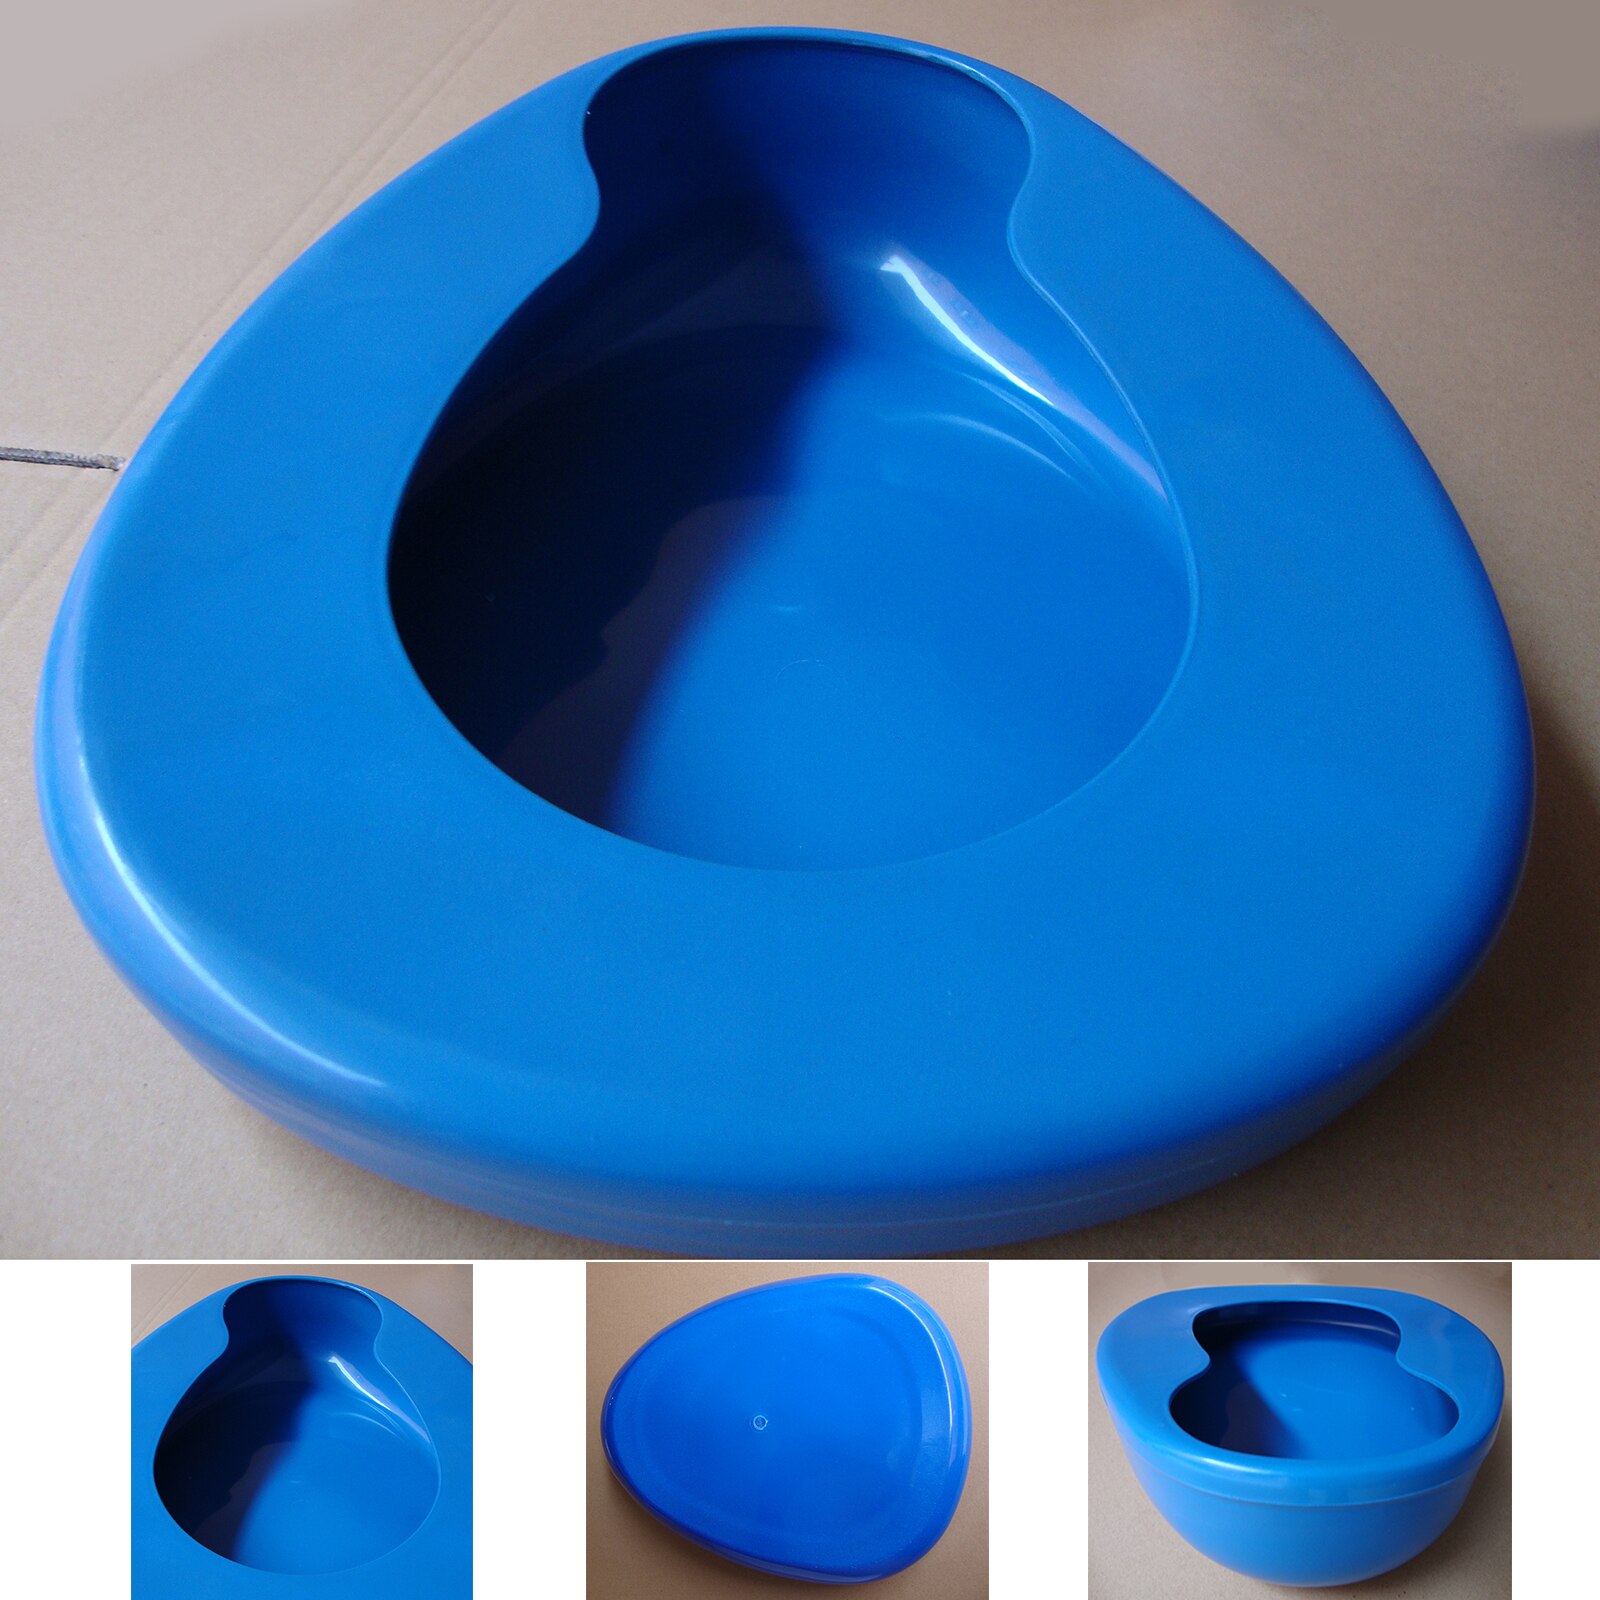 Smooth Bedpan Seat Urinal Unisex Potty for Elderly Daily Use in Bed, Chair or Wheelchair,Durable PP Material